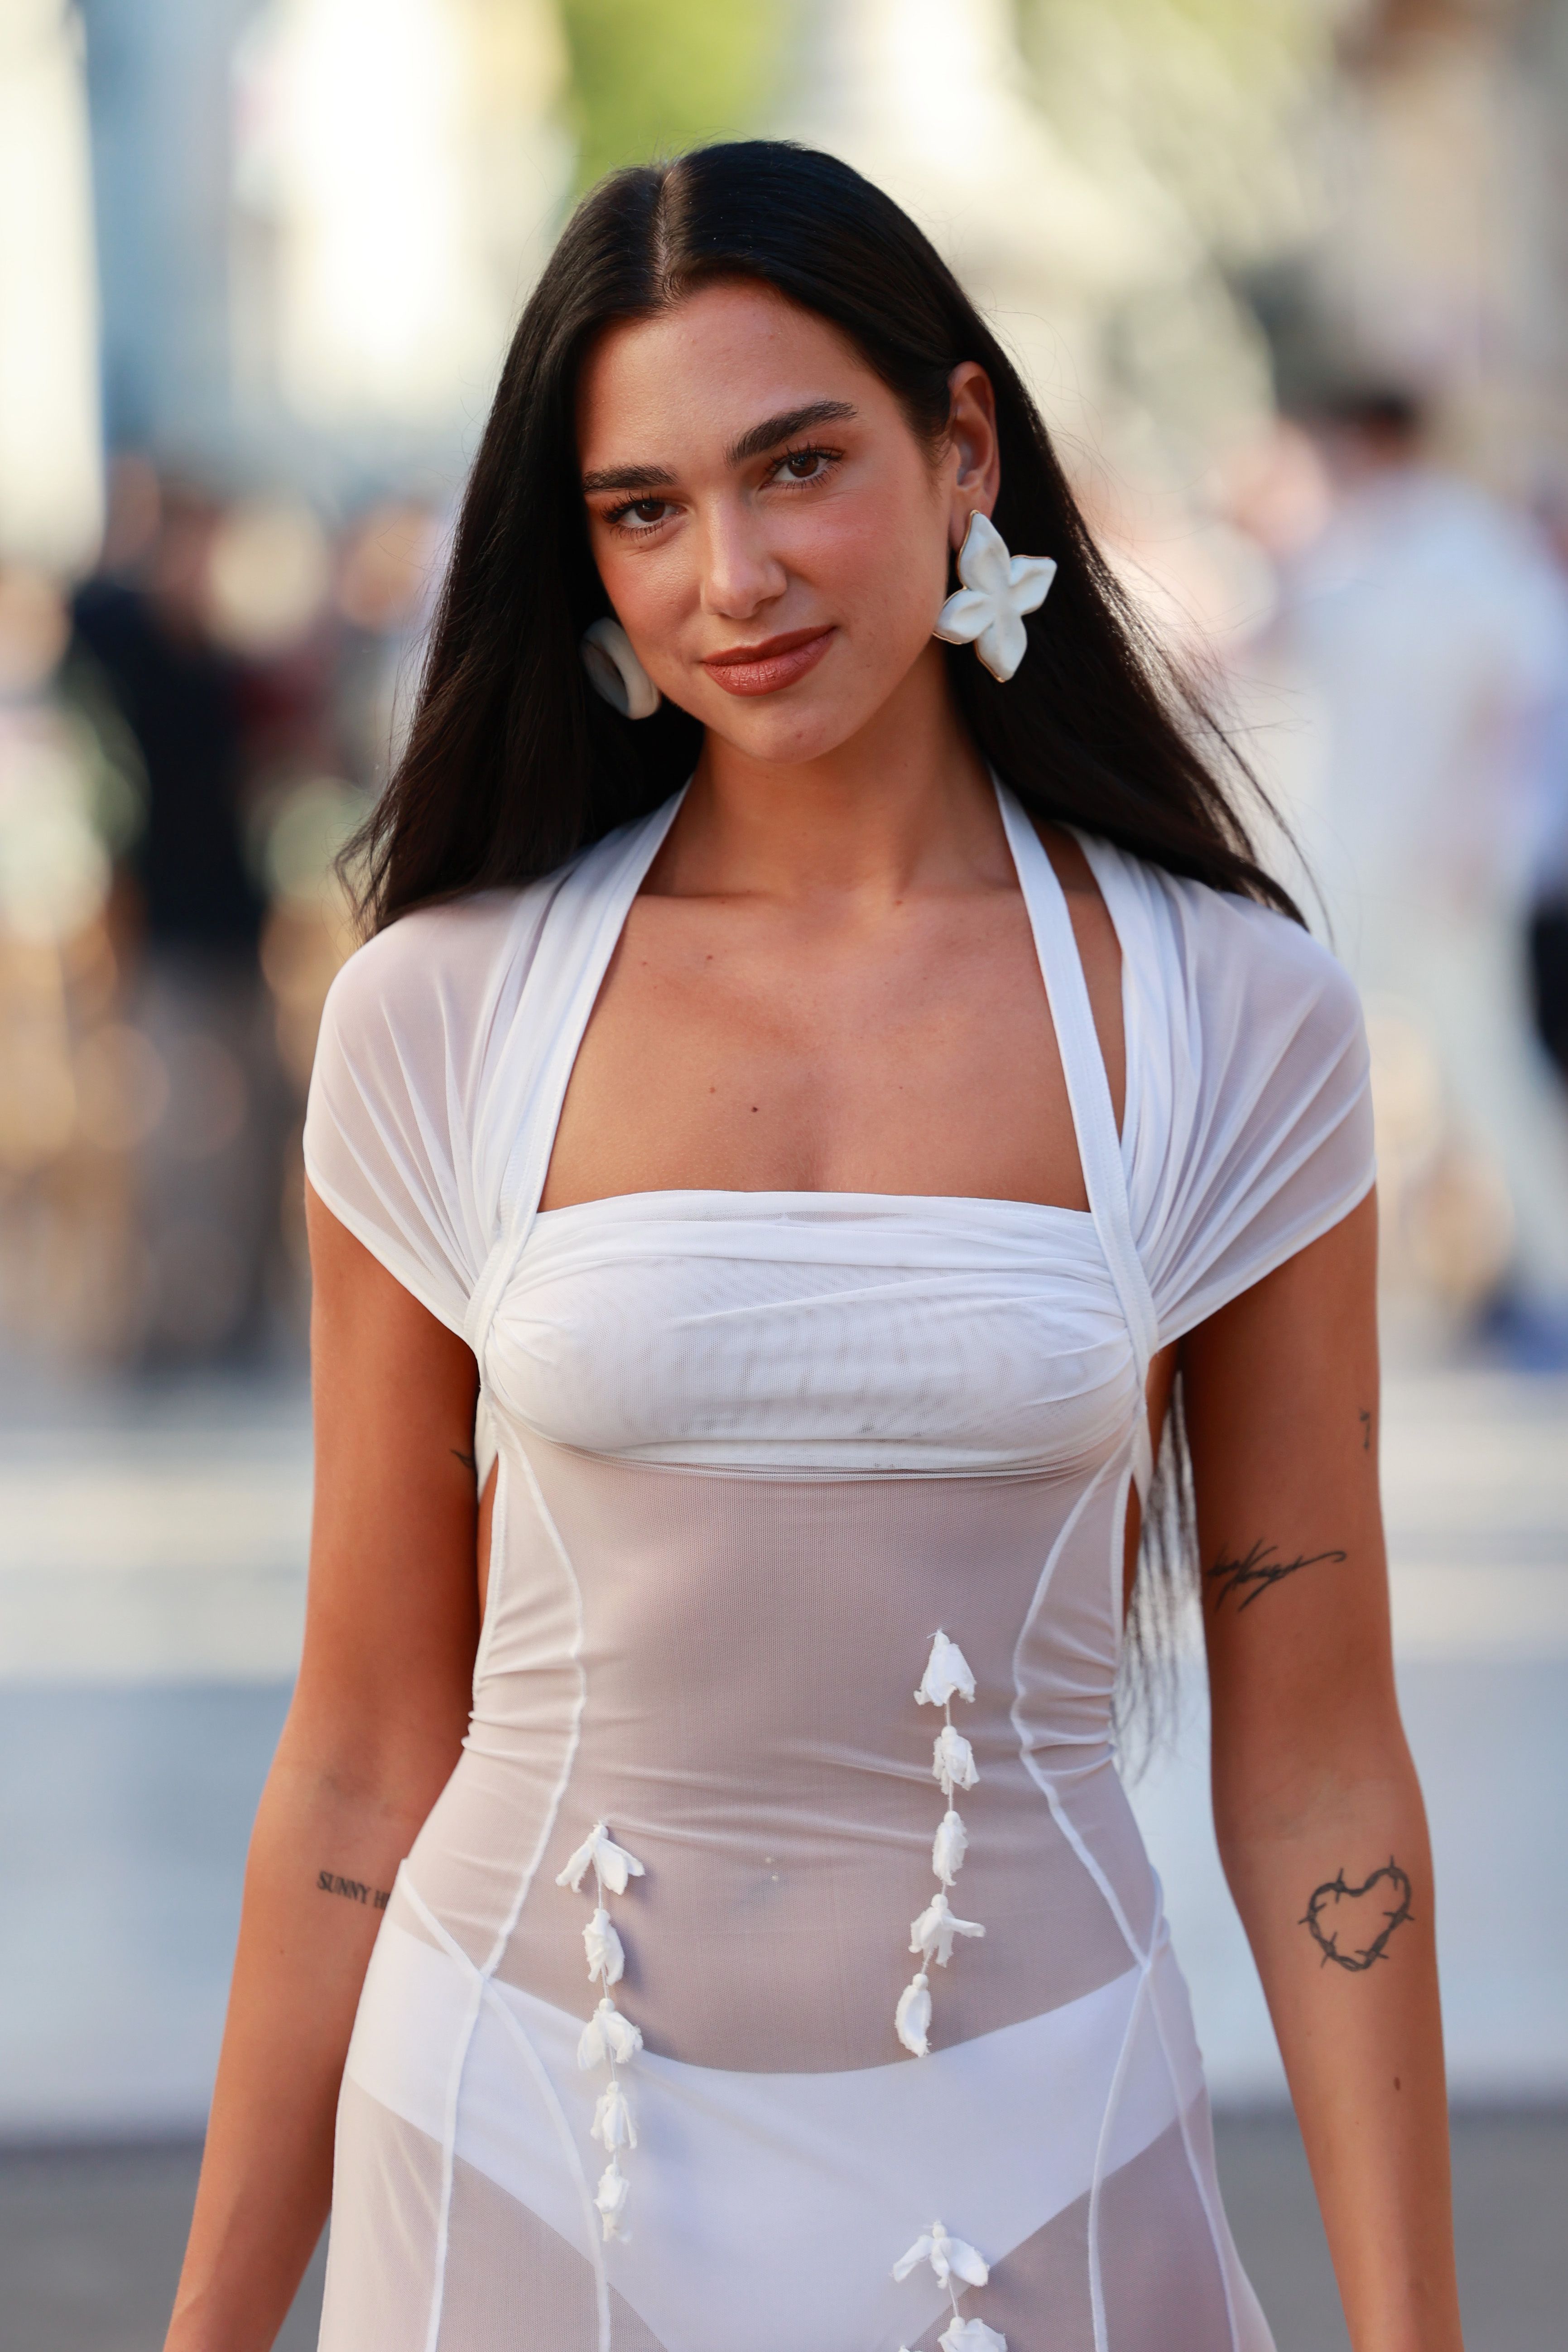 Dua Lipa is keeping the exposed thong trend alive